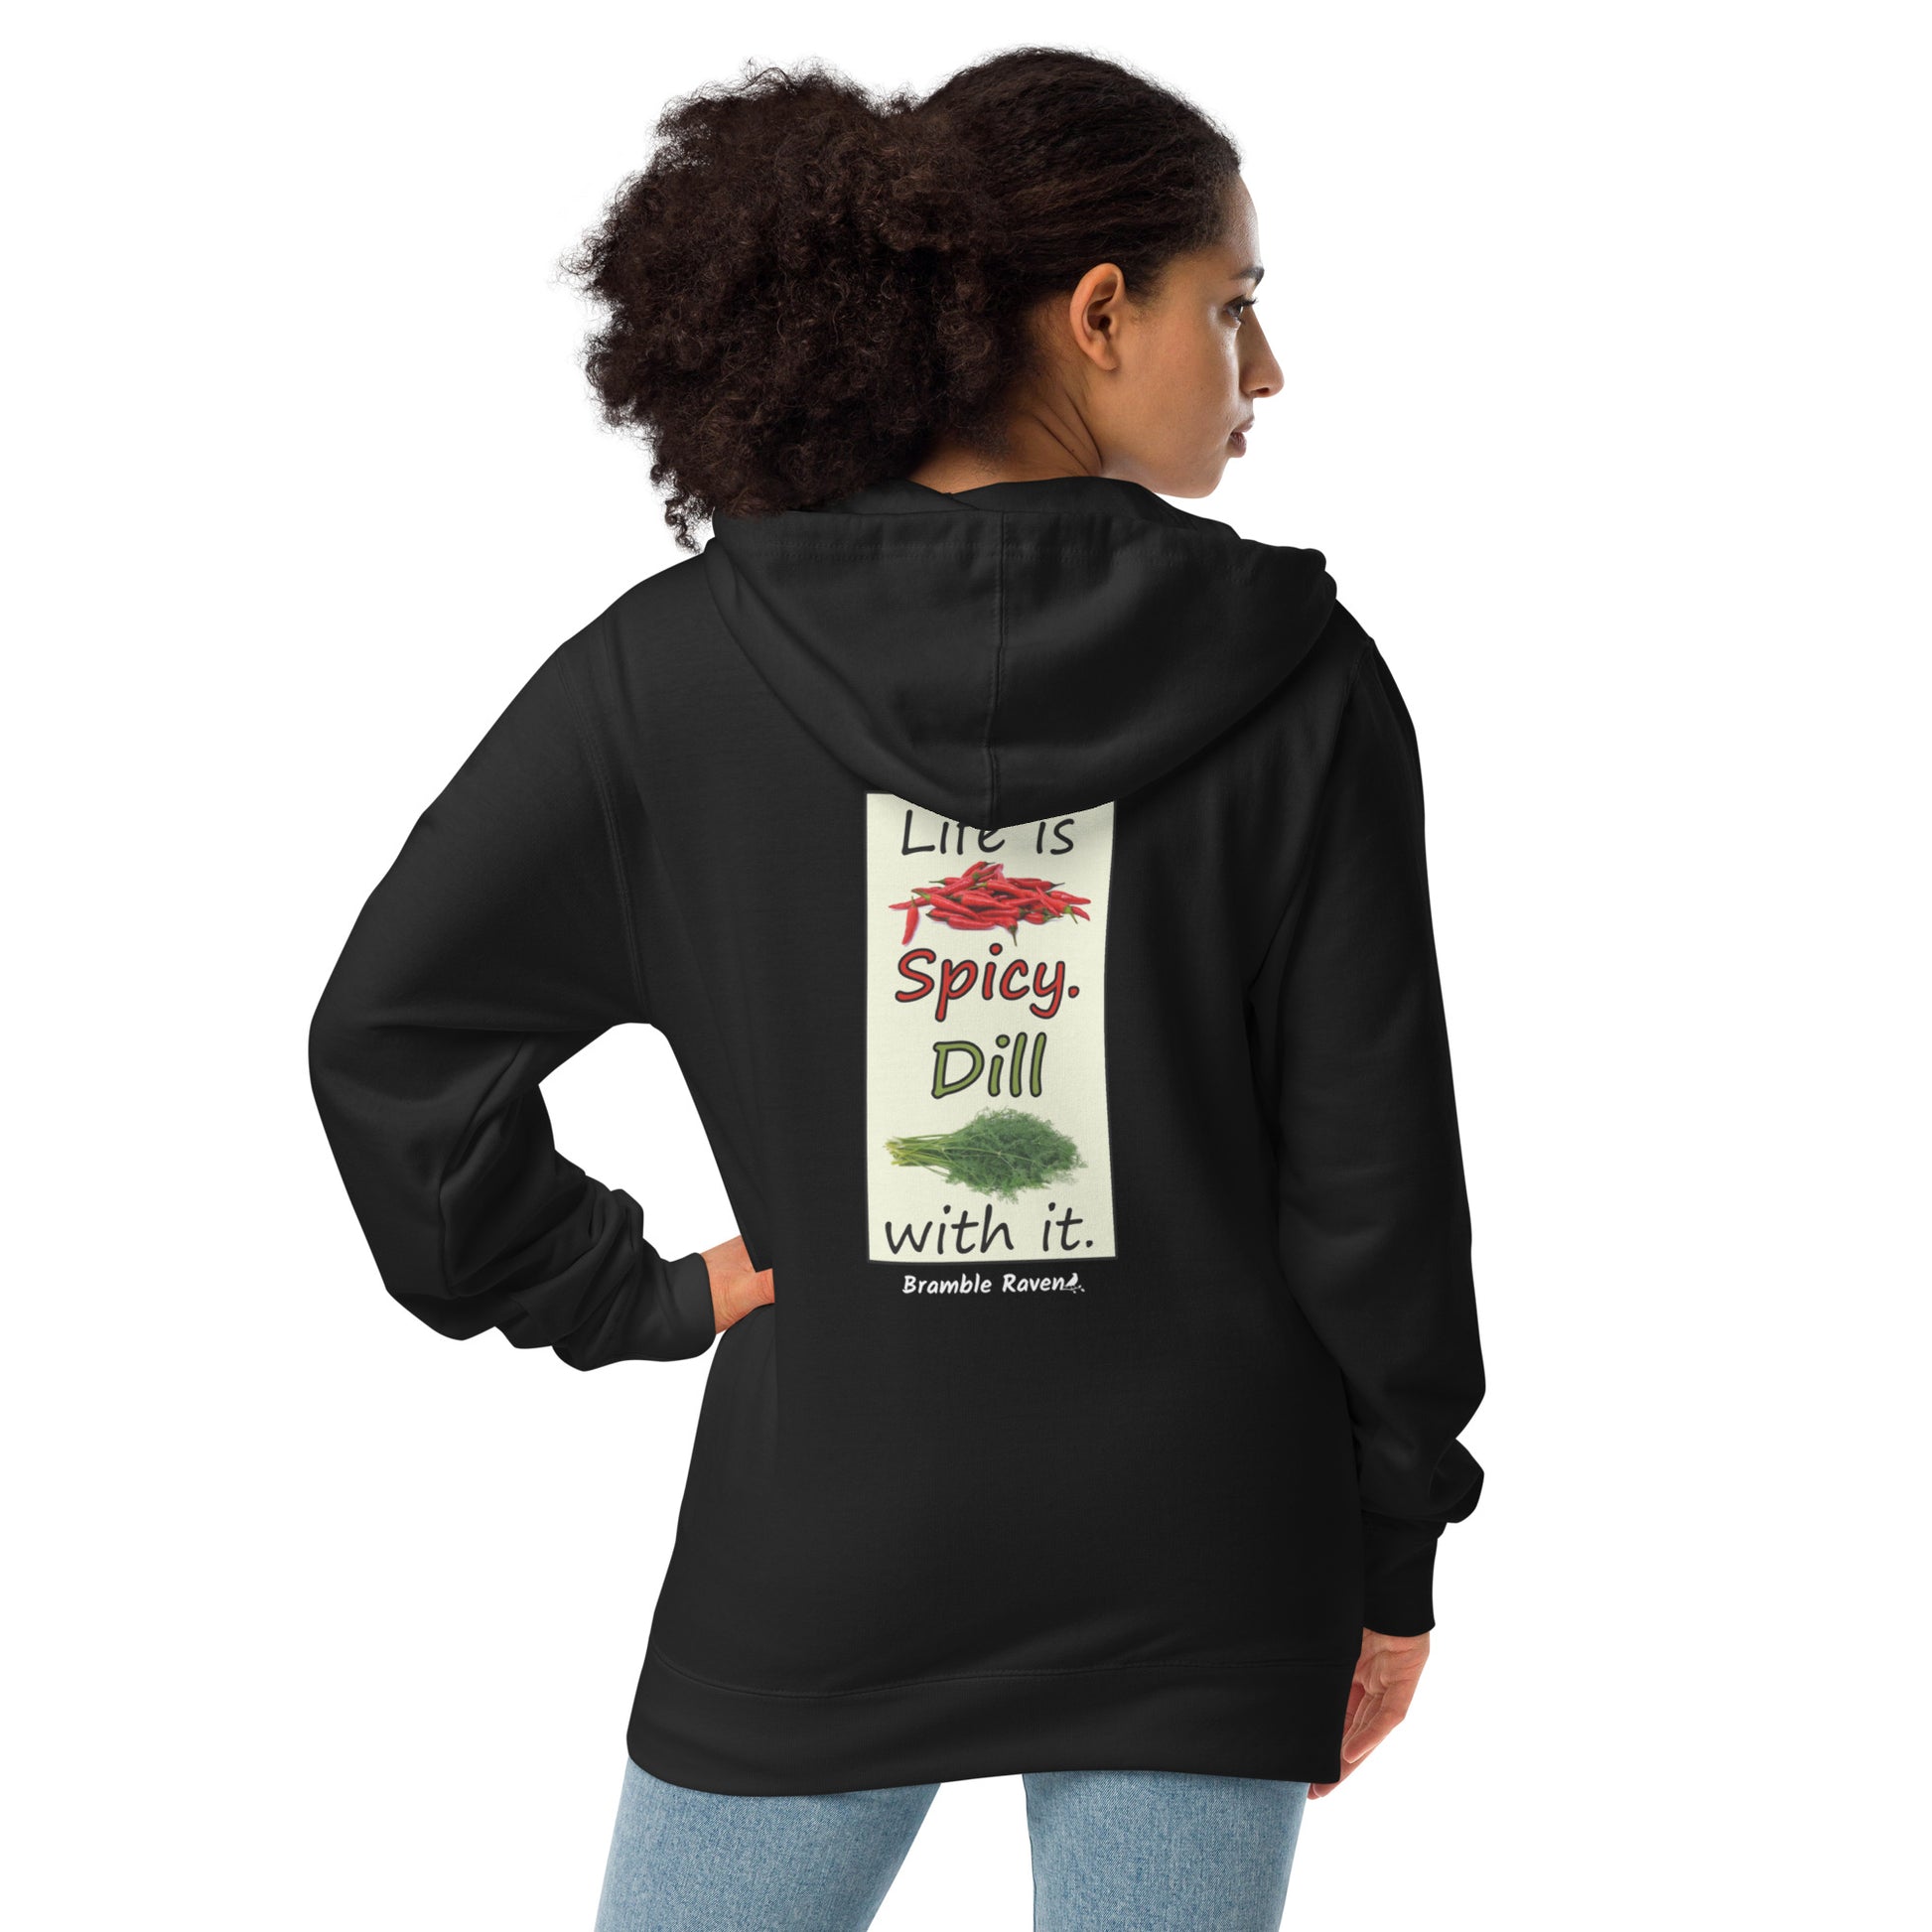 Life is spicy. Dill with it. Text with image of chili peppers and dill weed. Graphic printed on the back of unisex charcoal black zip up hoodie. Shown on female model.